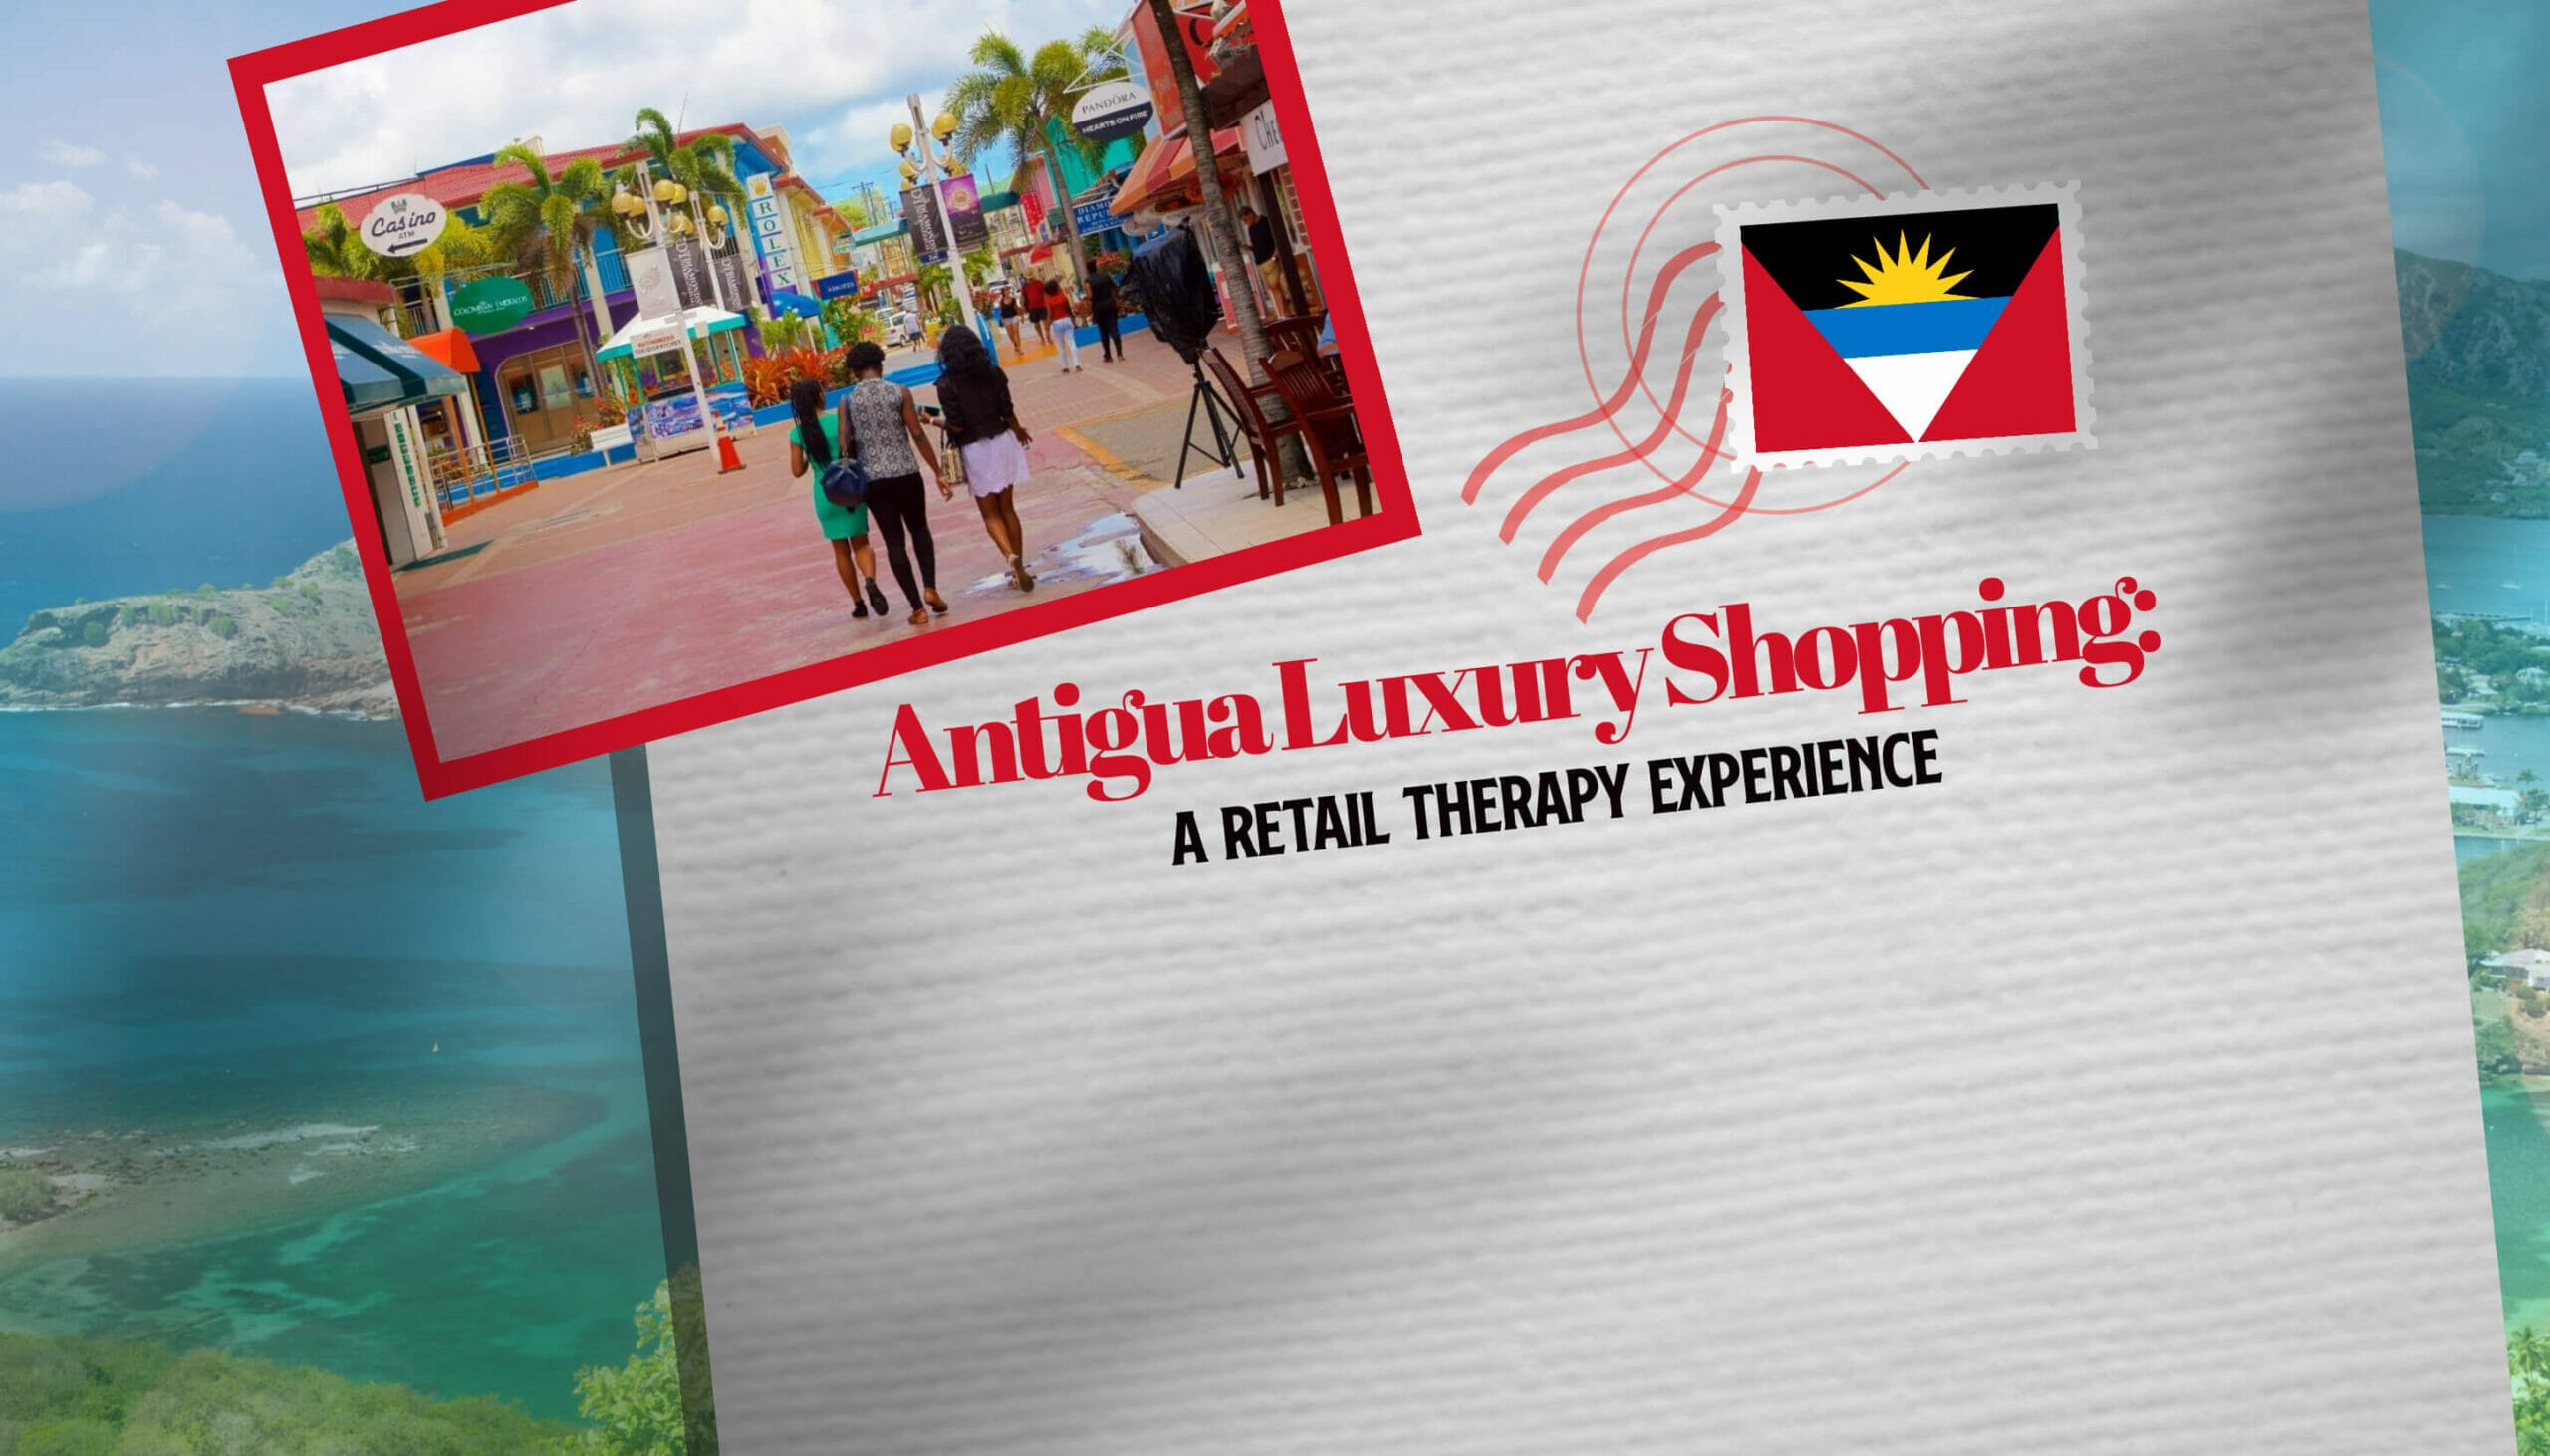 Antigua Luxury Shopping A Retail Therapy Experience